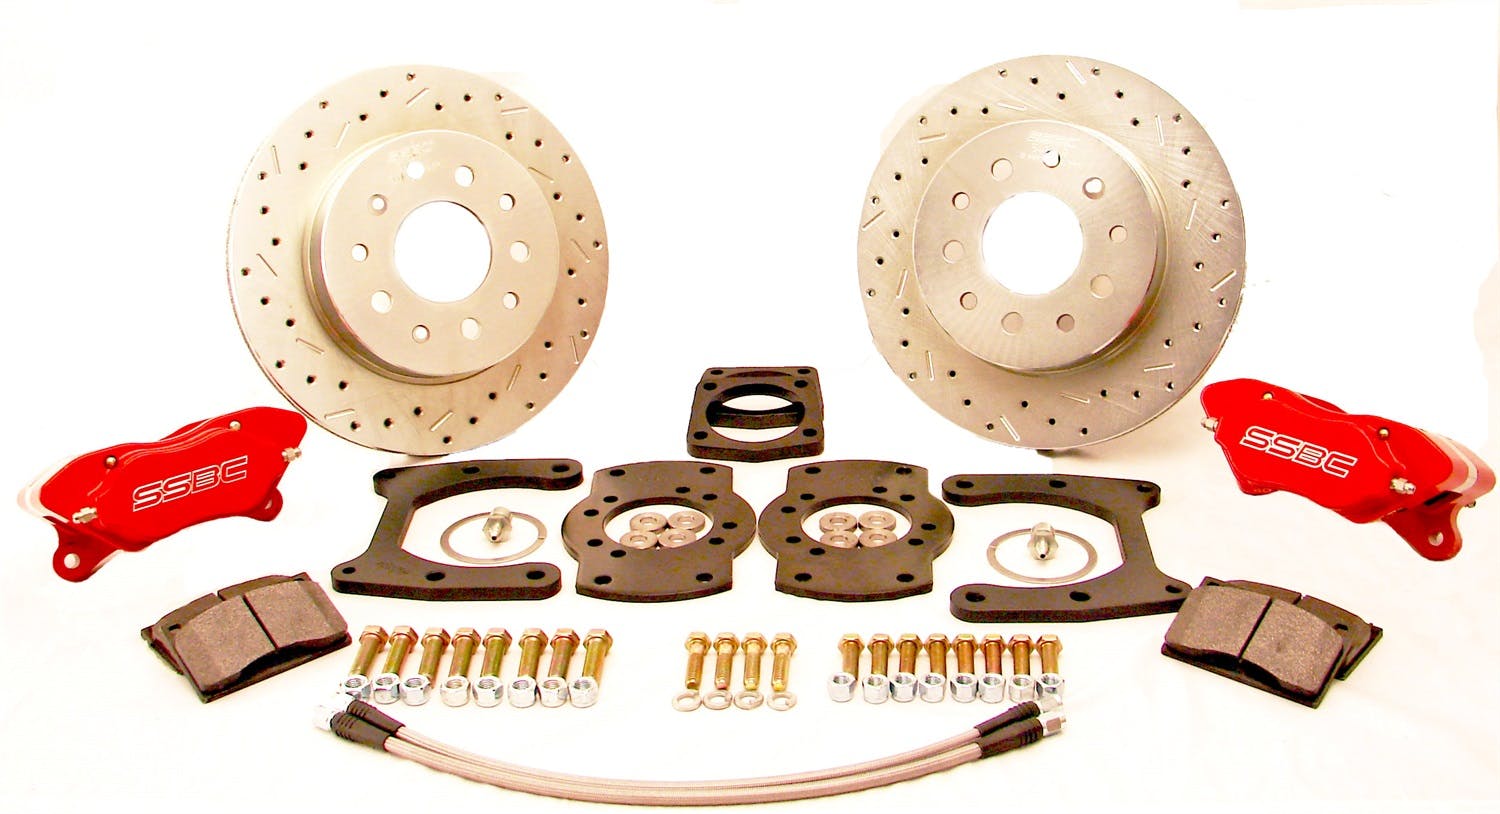 Stainless Steel Brakes W125-42 At The Wheels Comp S Chevy 10/12-bolt rear